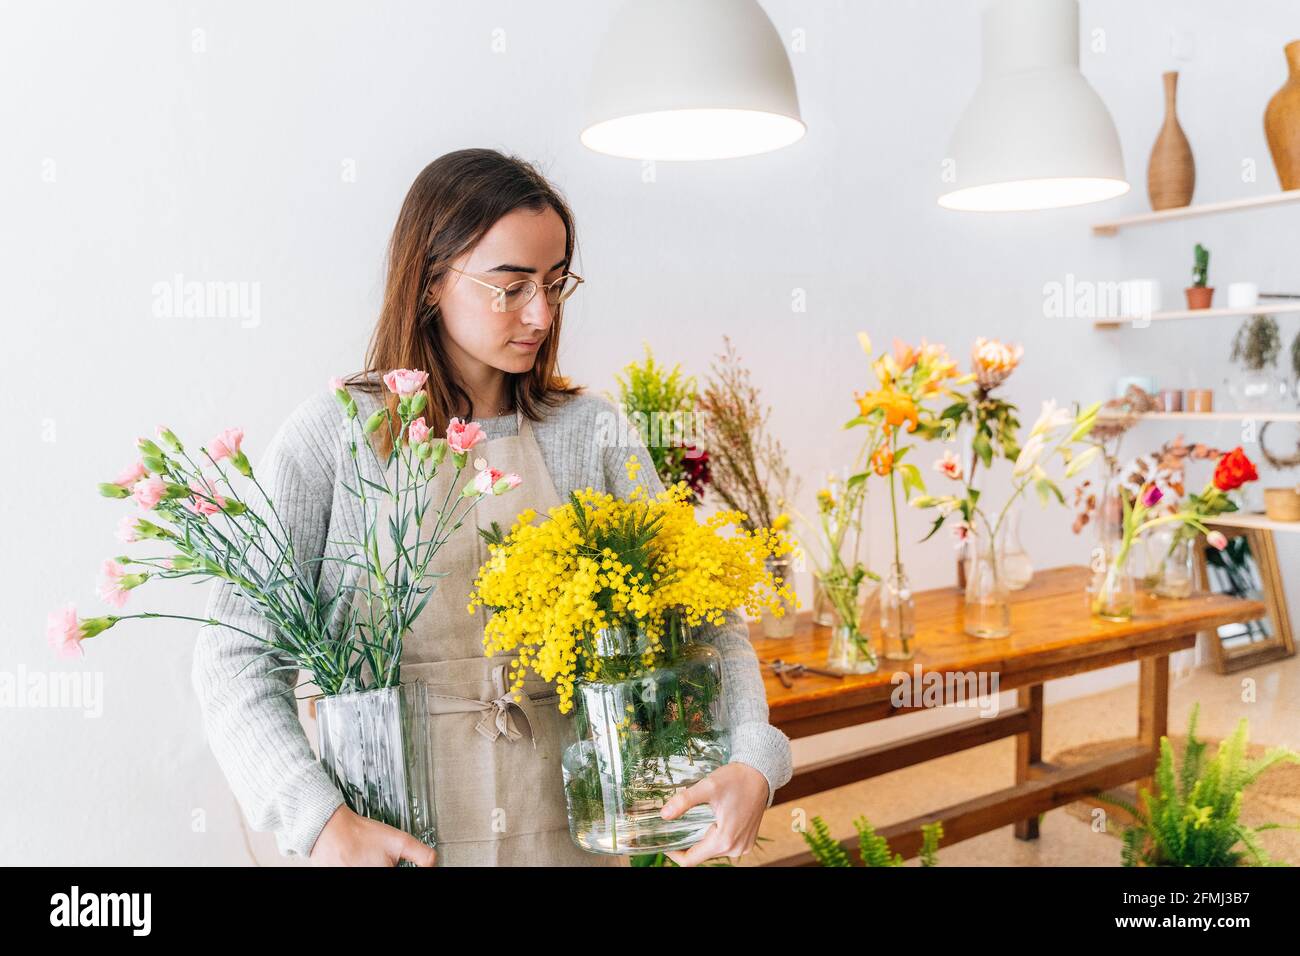 Calm young ethnic female florist in apron and eyeglasses holding glass vases with yellow mimosa and clove pink flowers in store Stock Photo